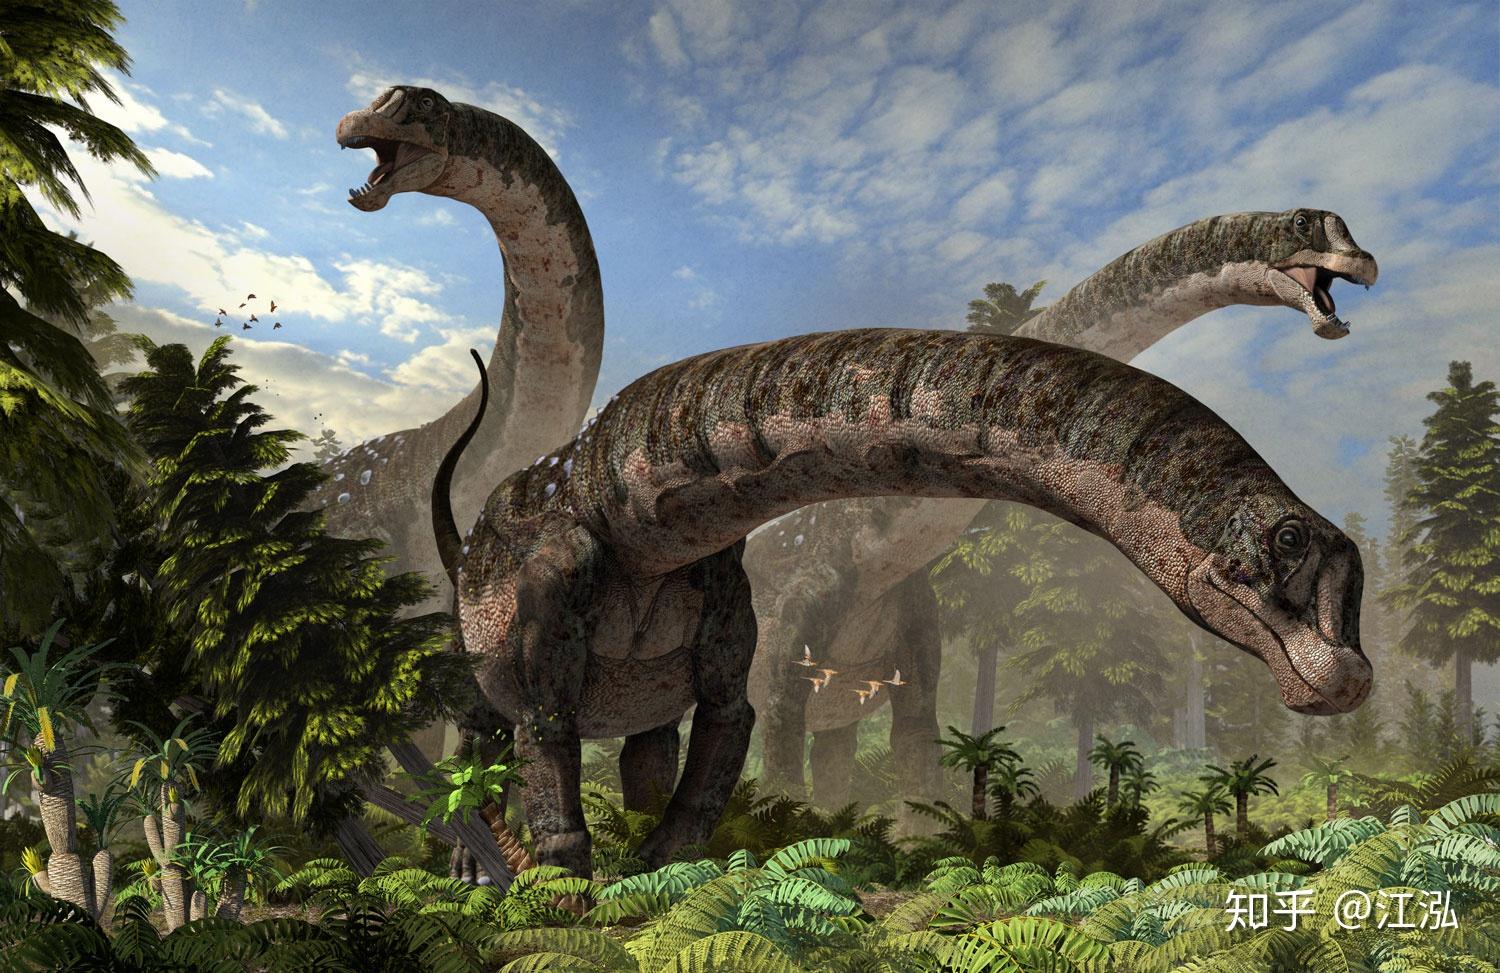 Prehistoric giants: The biggest dinosaurs to ever exist | How It Works Magazine